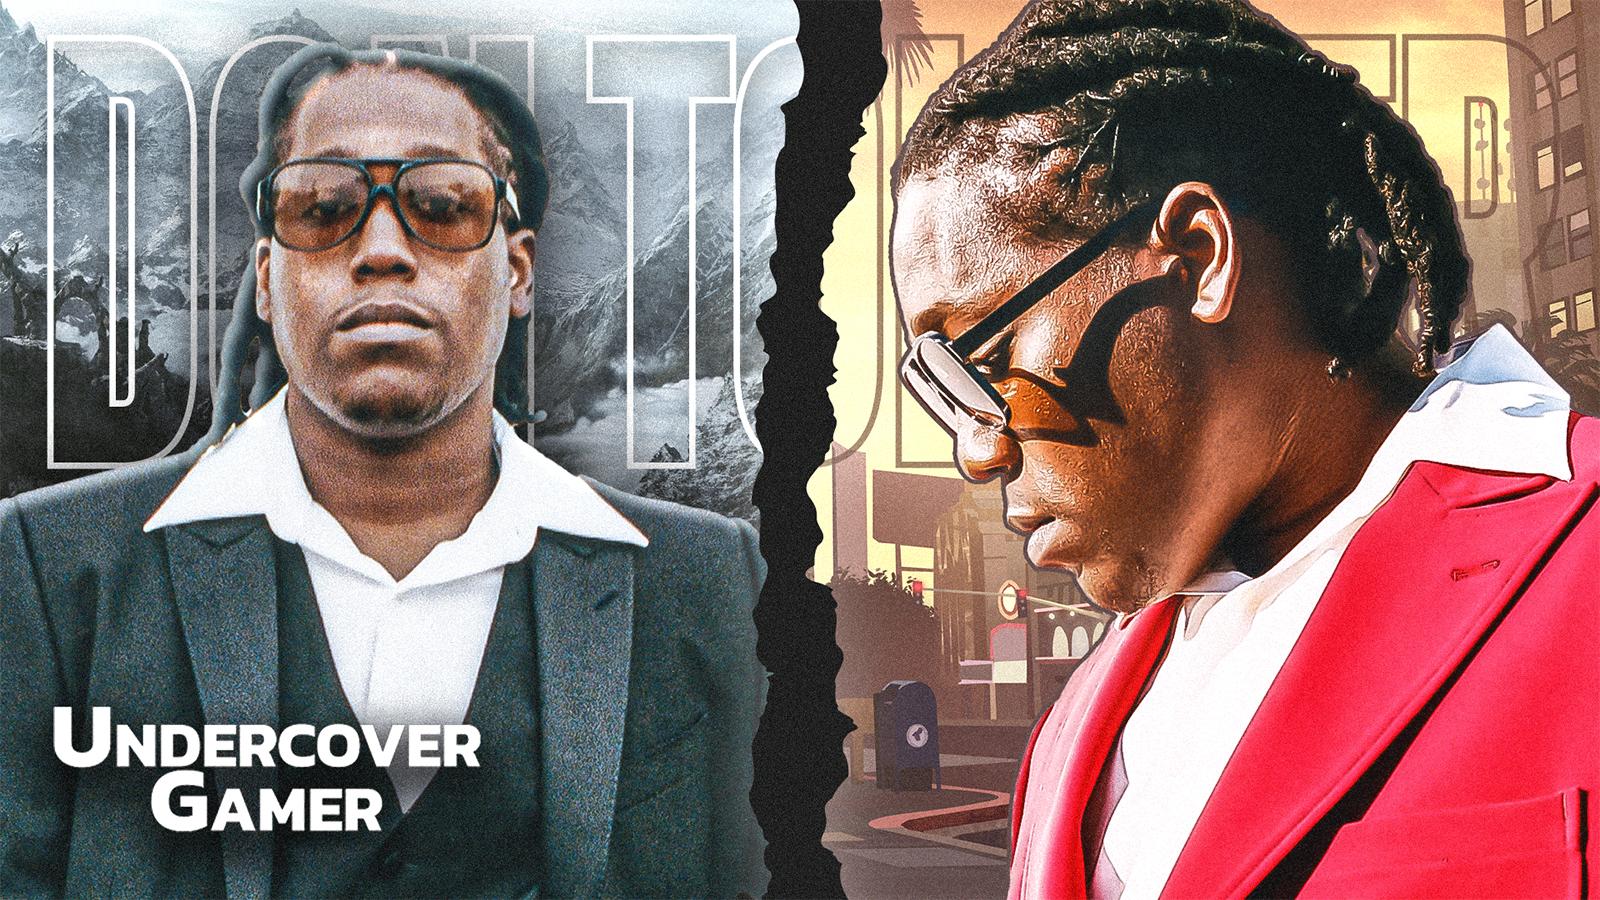 Don-Toliver-interview-undercover-gamer